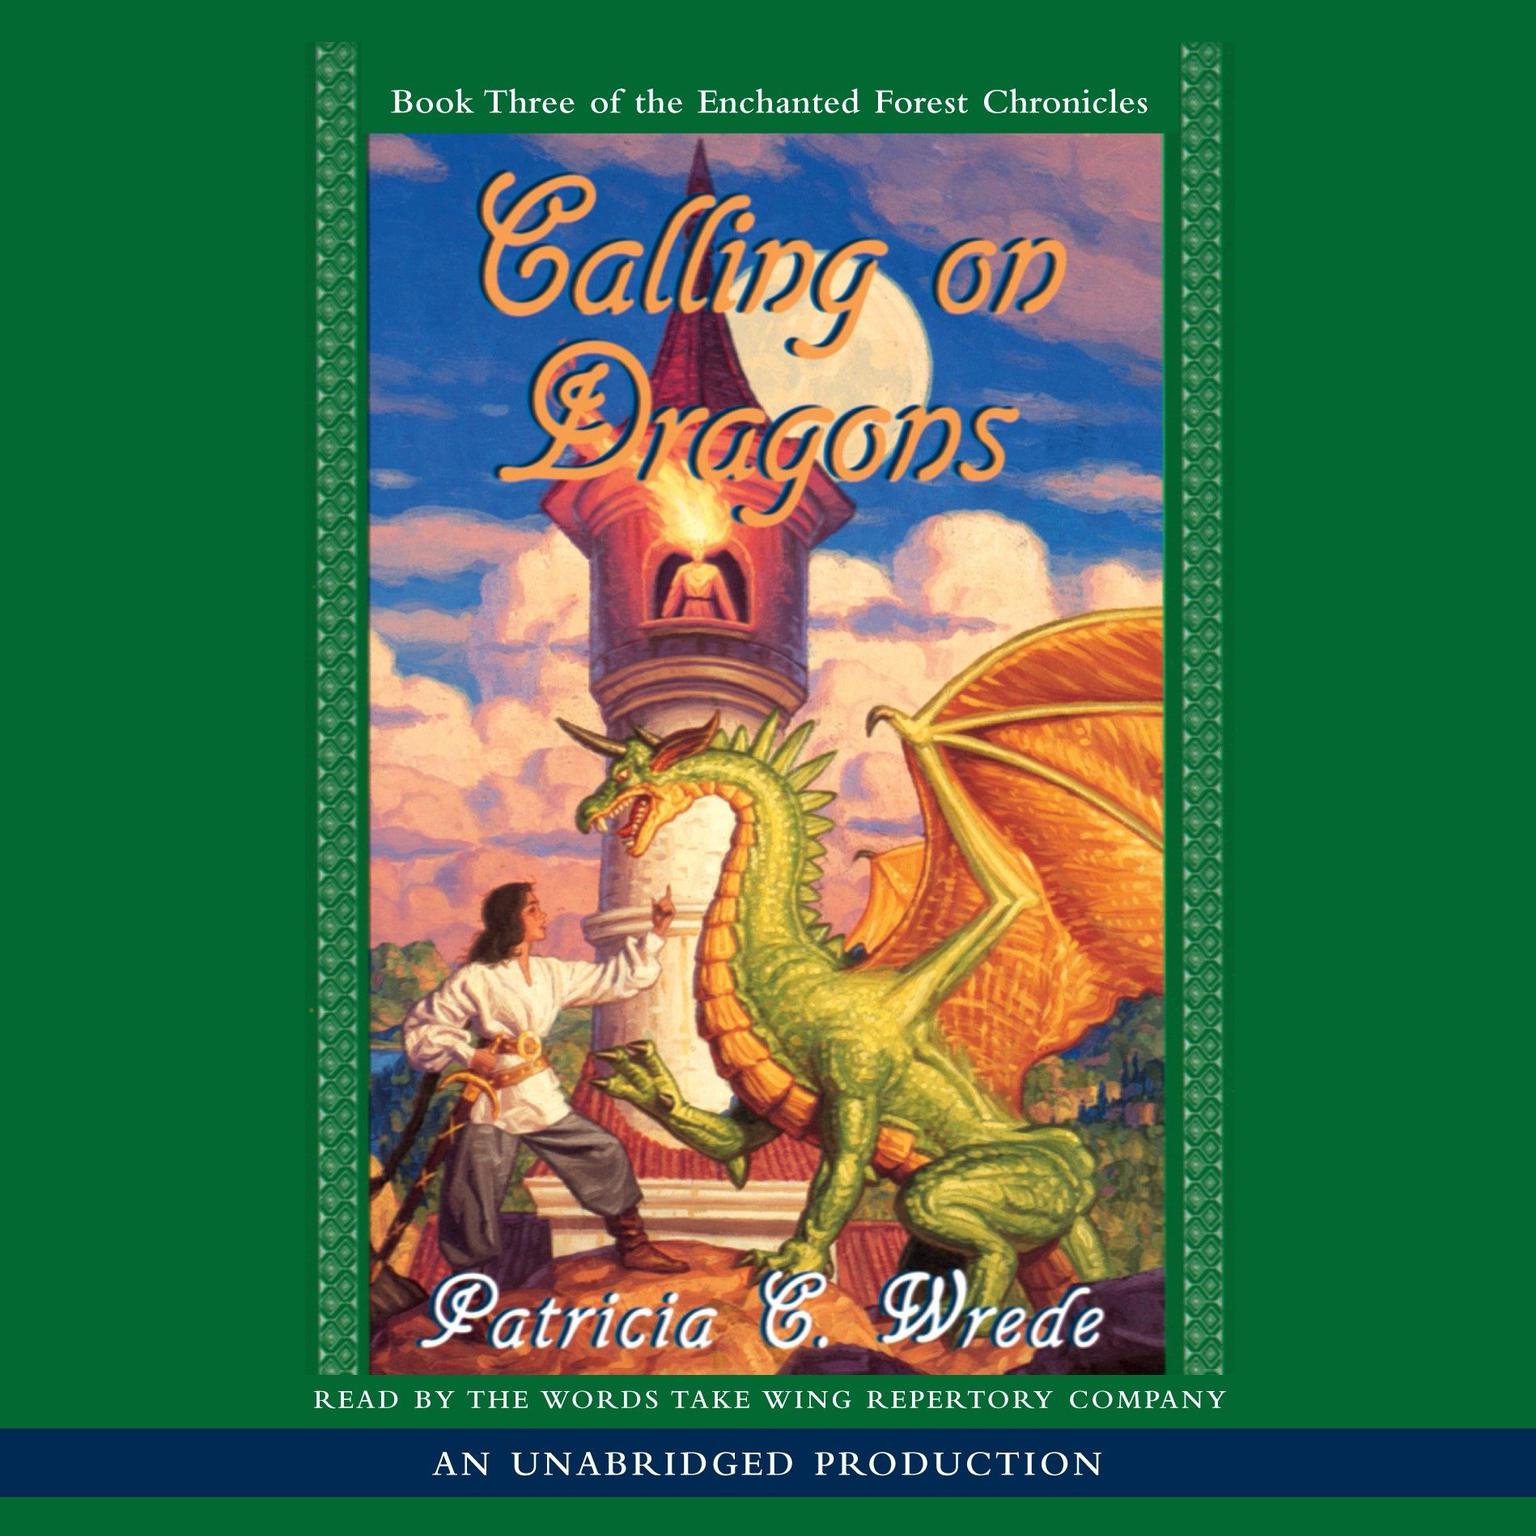 The Enchanted Forest Chronicles Book Three: Calling on Dragons Audiobook, by Patricia C. Wrede